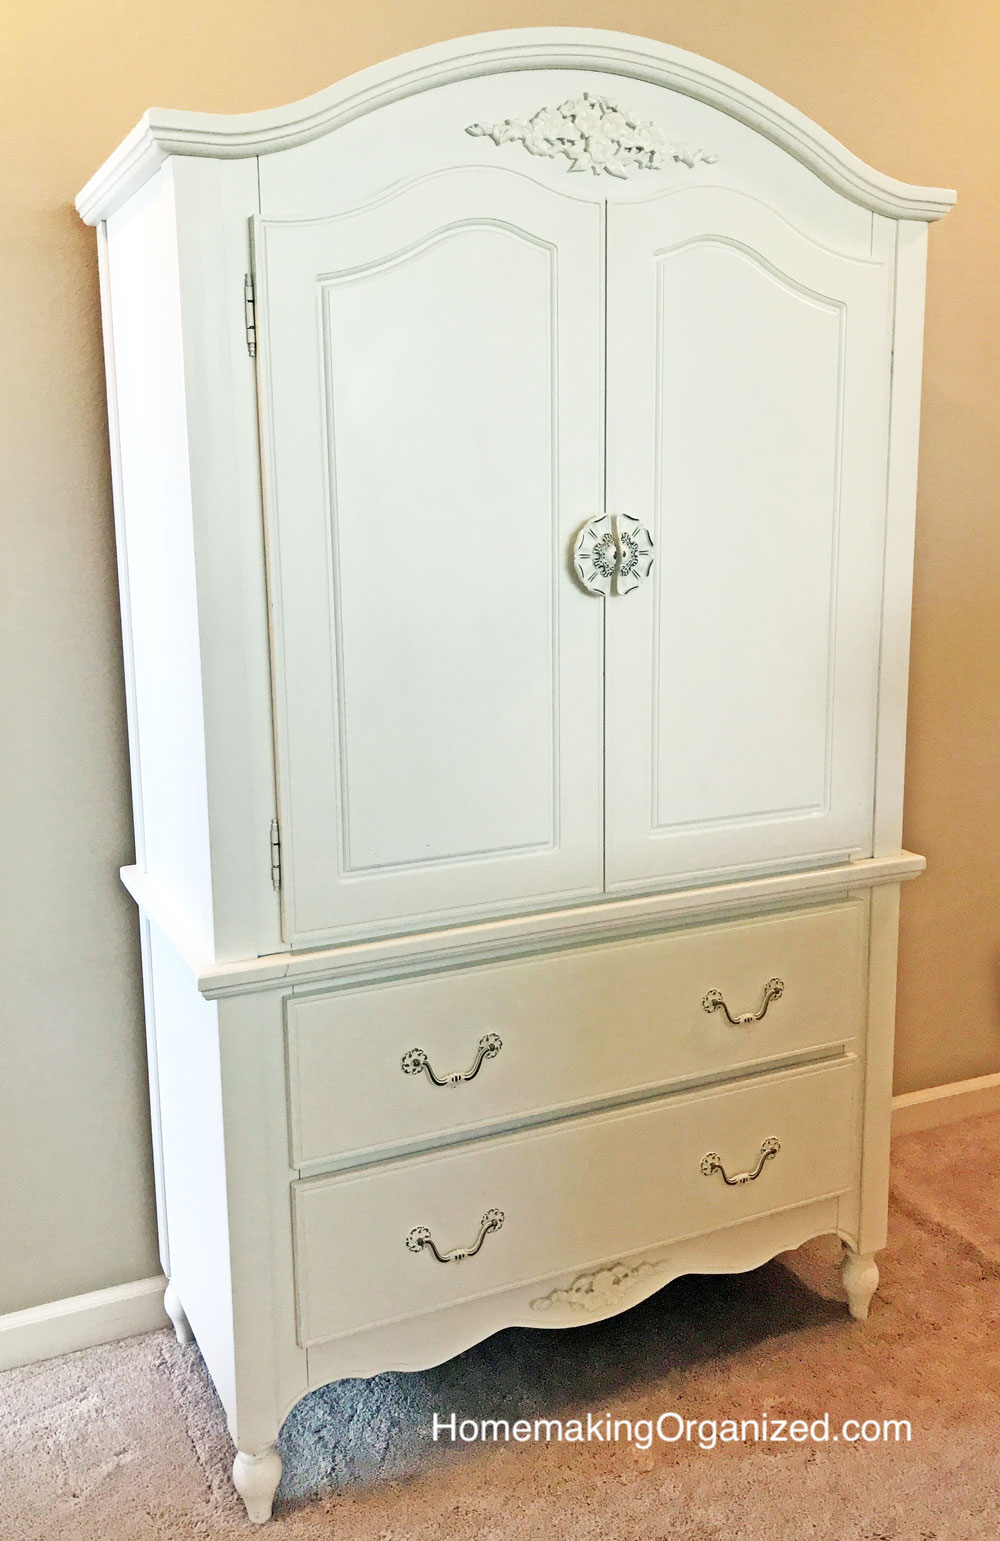 Armoire for holding linens.